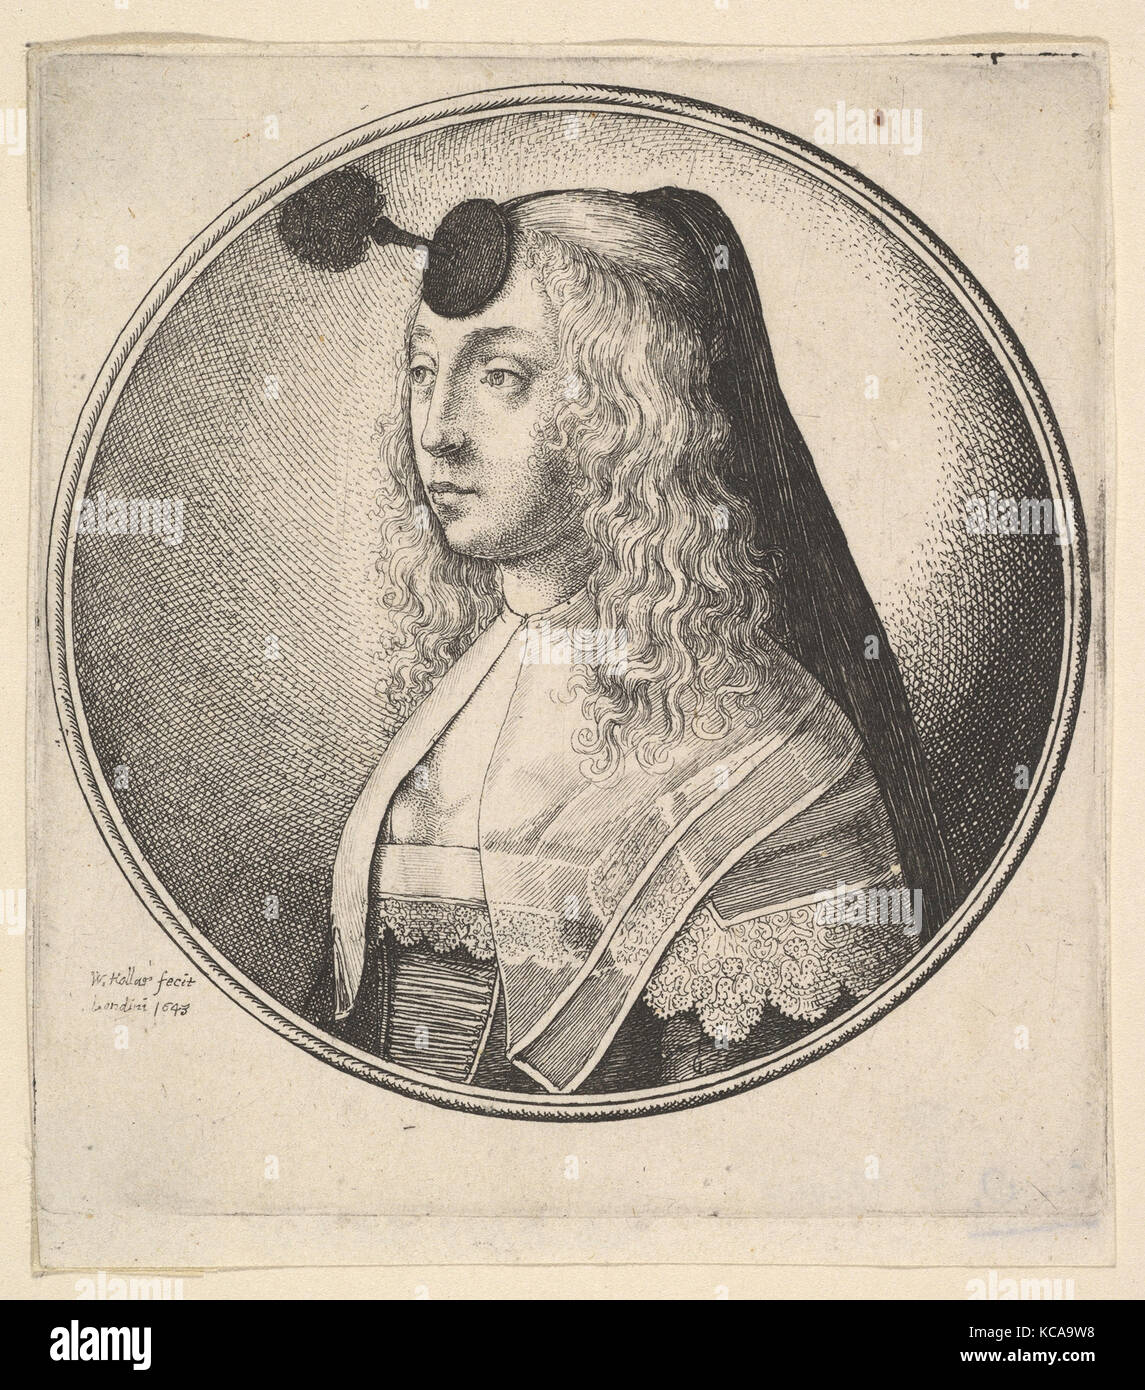 Woman with houpette on forehead turned to left, Wenceslaus Hollar, 1643 Stock Photo